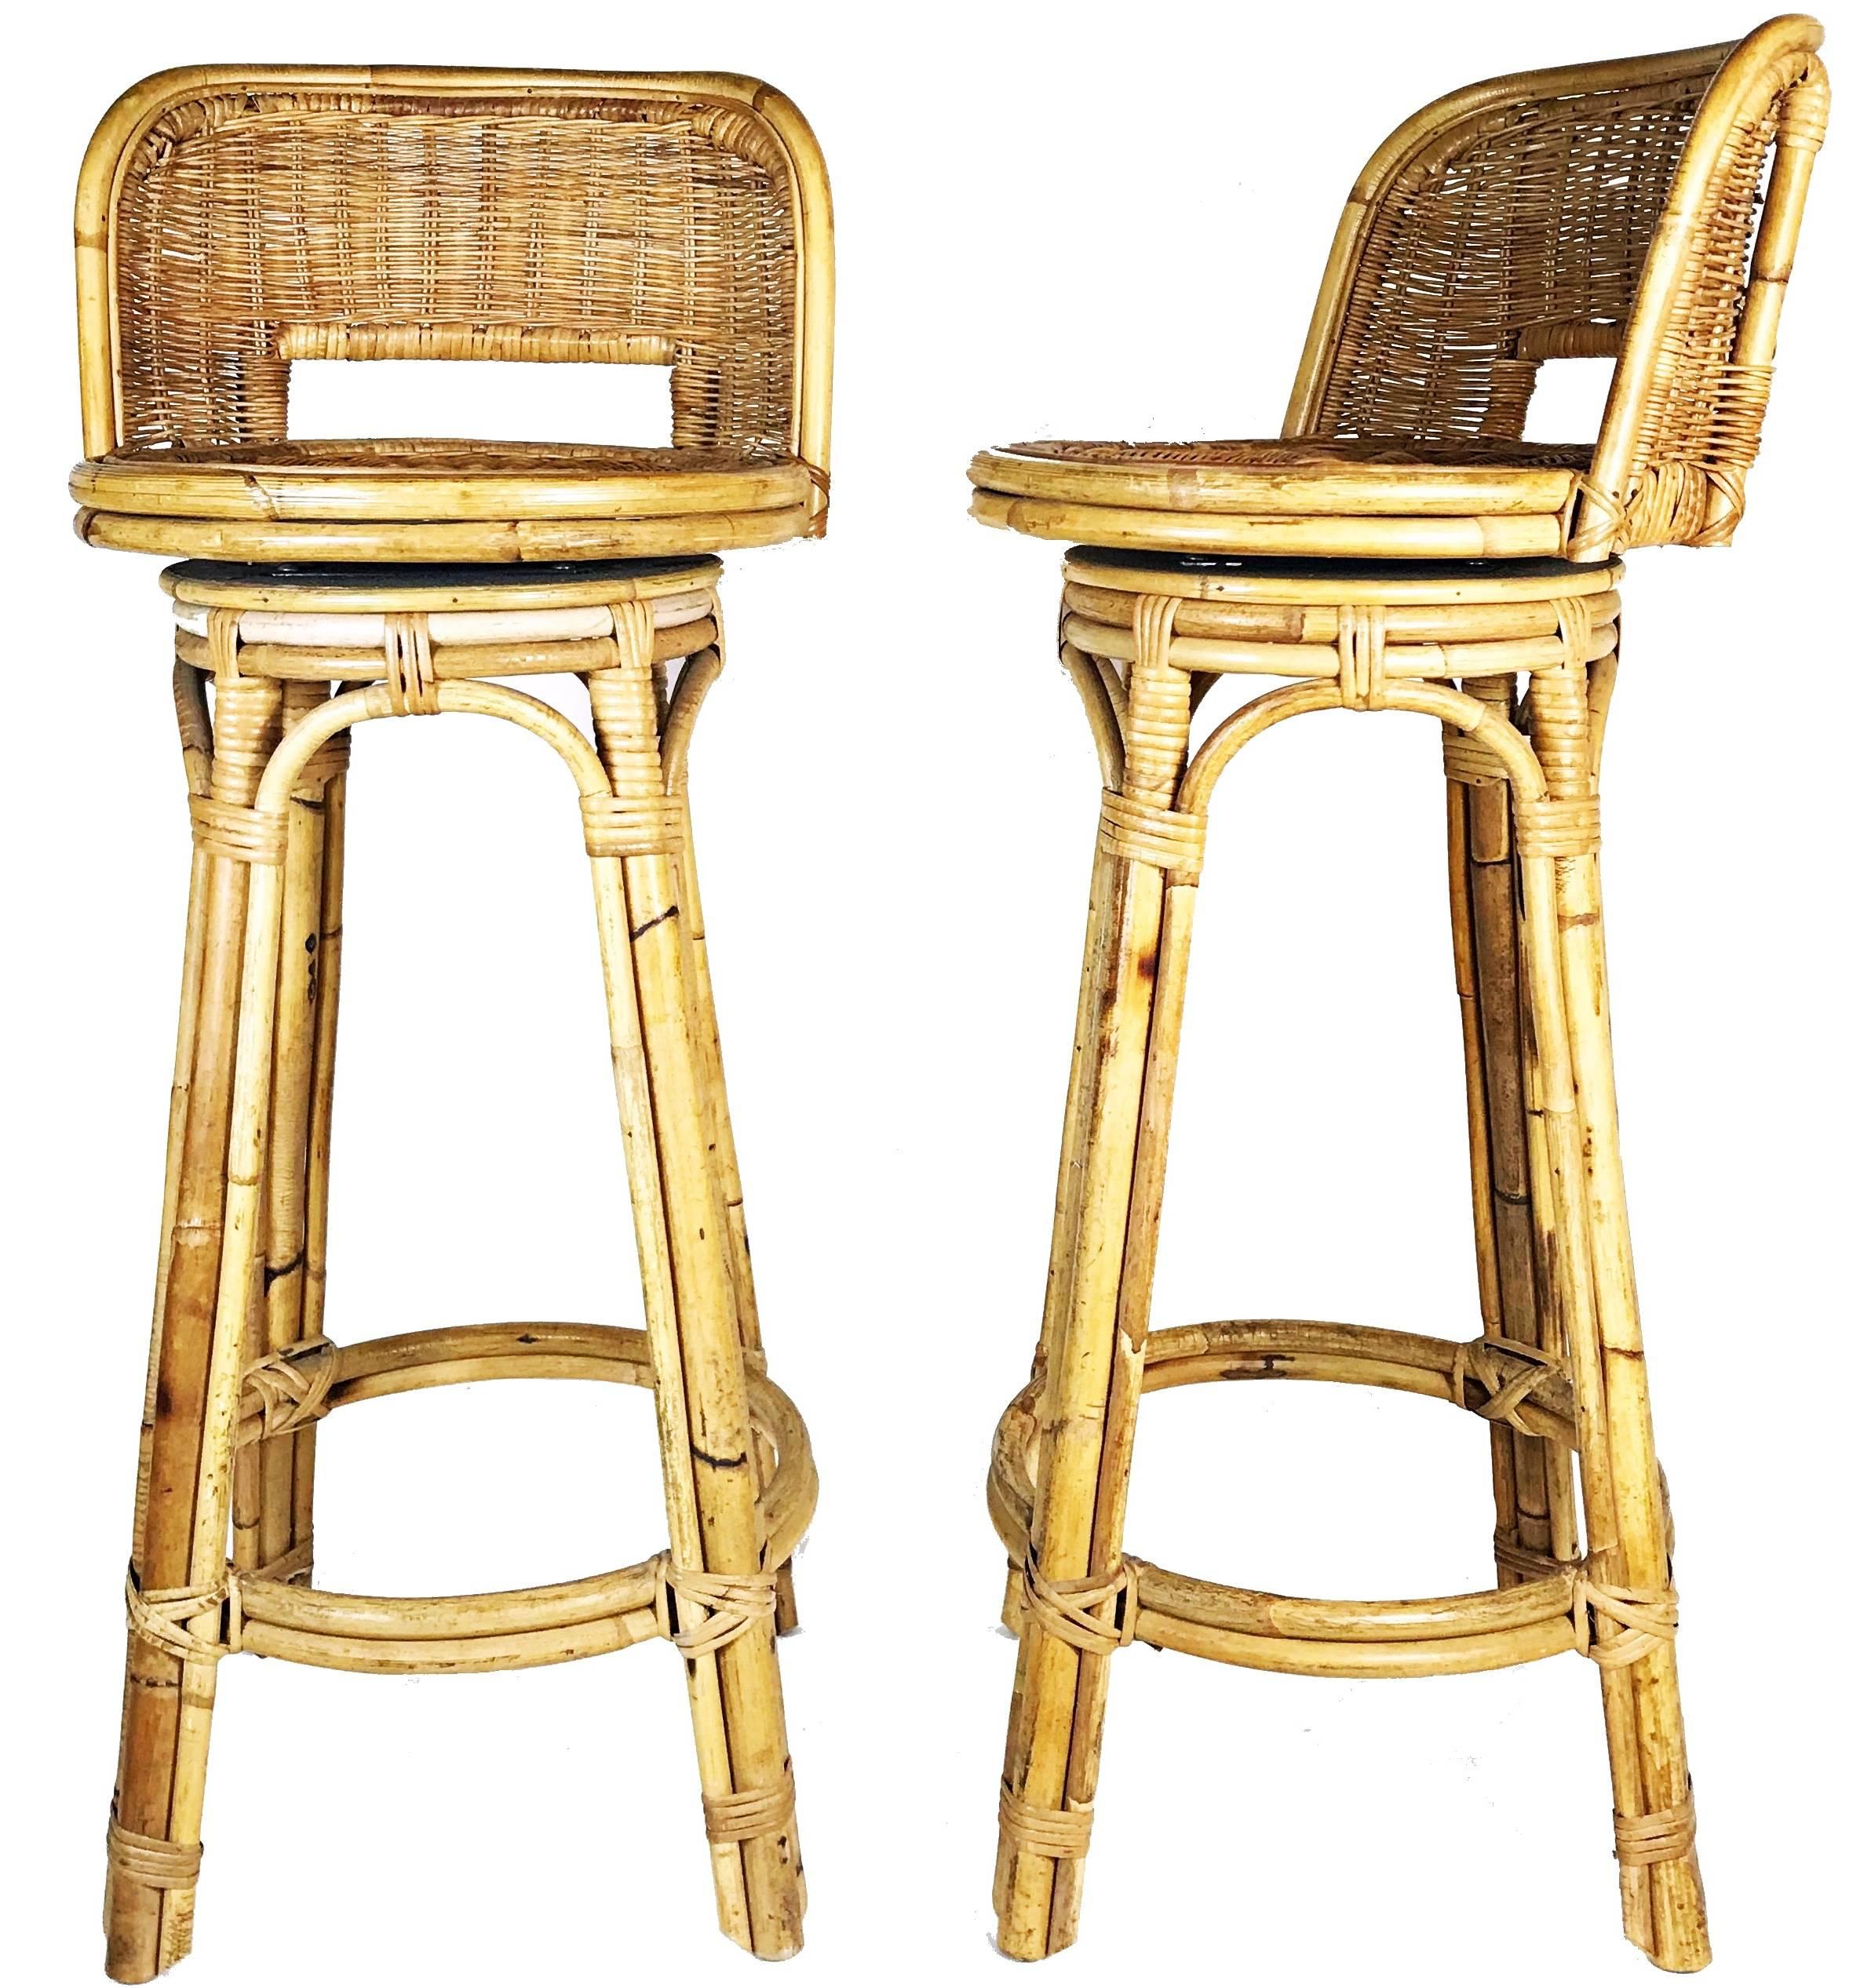 Pair of rare rattan bar stools in style of Paul T. Frankl from 1950s - epic set that will look fabulous in any space. The stools feature thick bamboo frames and comfortable rattan seats conveniently swivel for ease of use. Overall good vintage